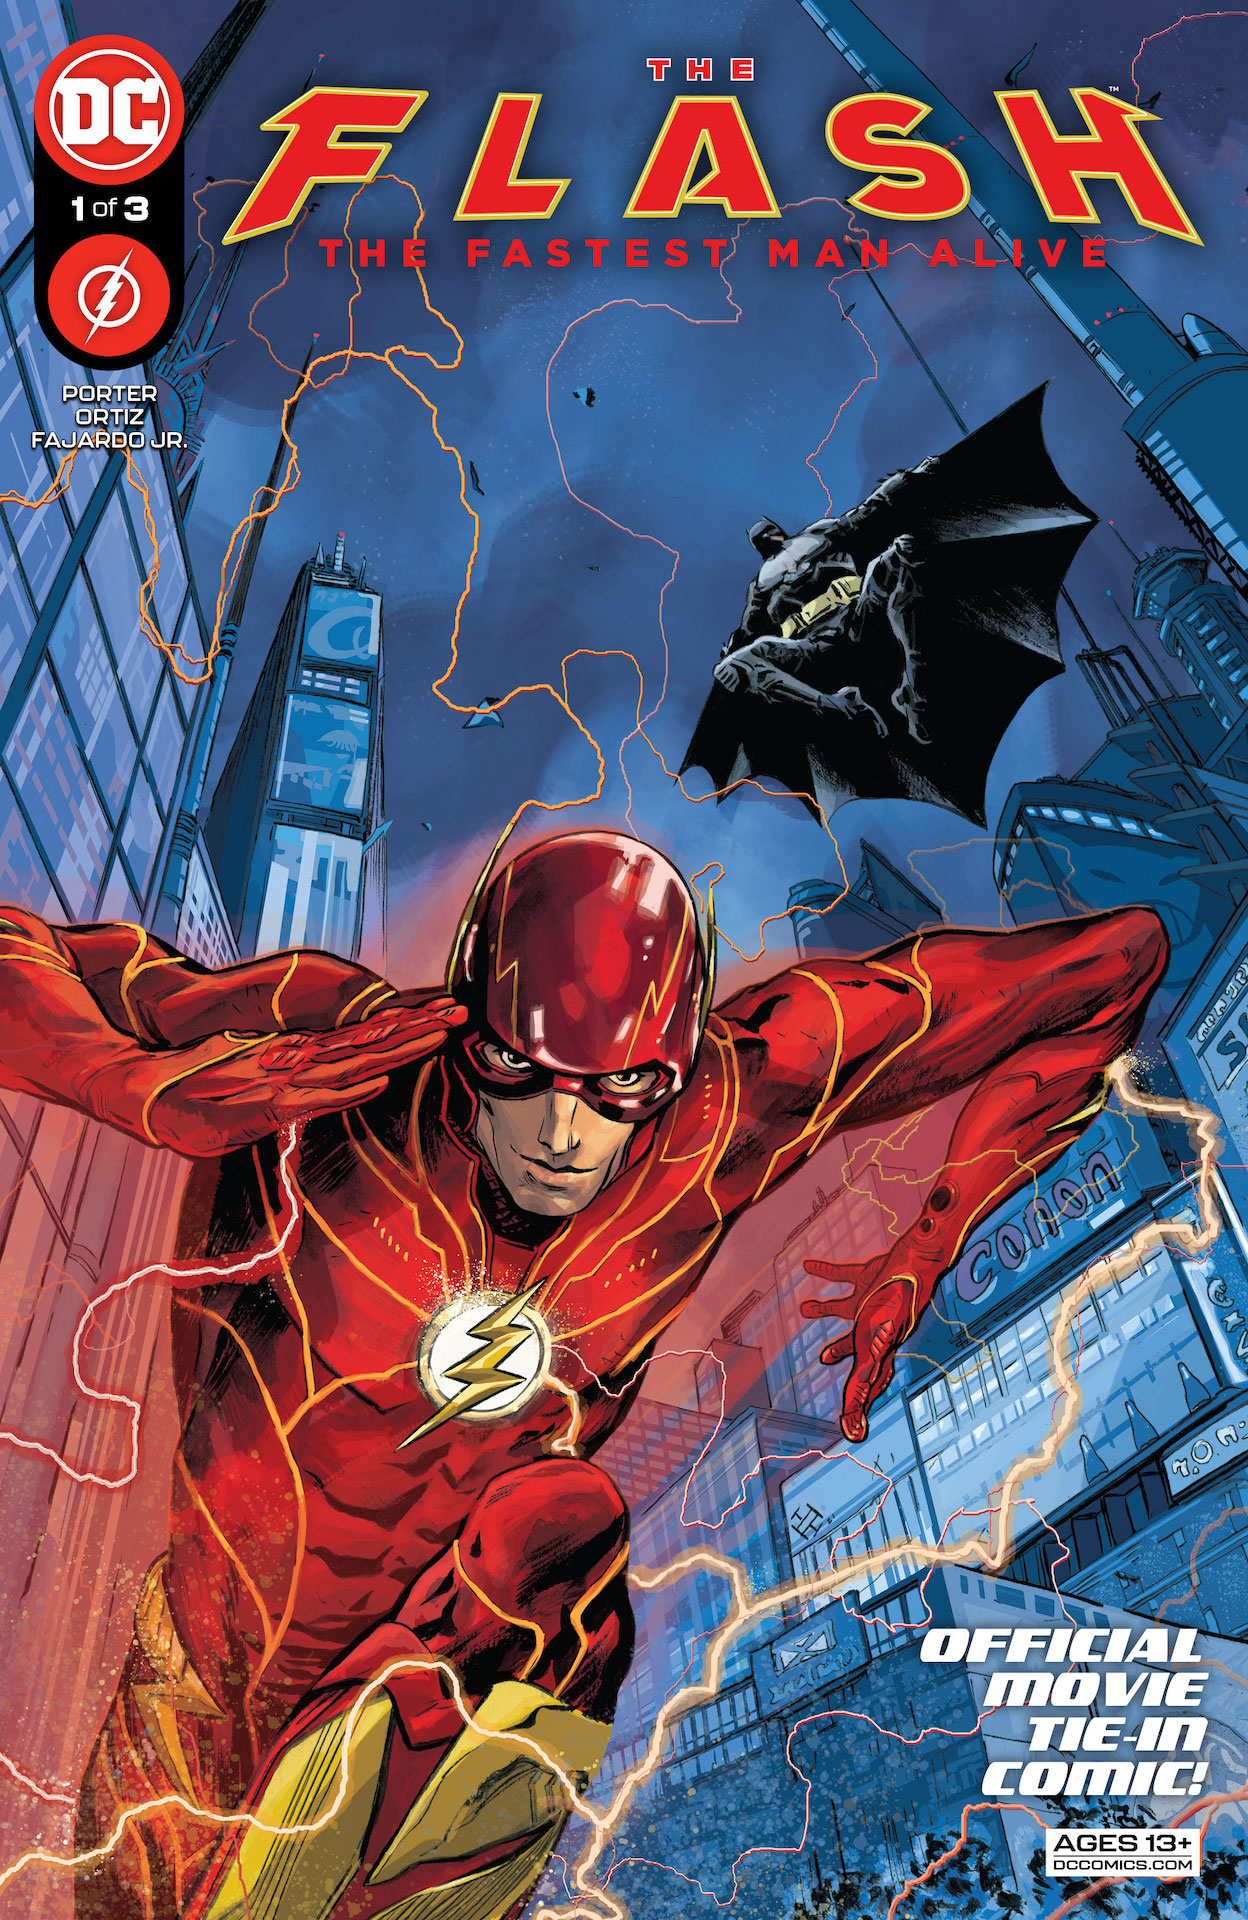 DC Preview: The Flash: The Fastest Man Alive #1